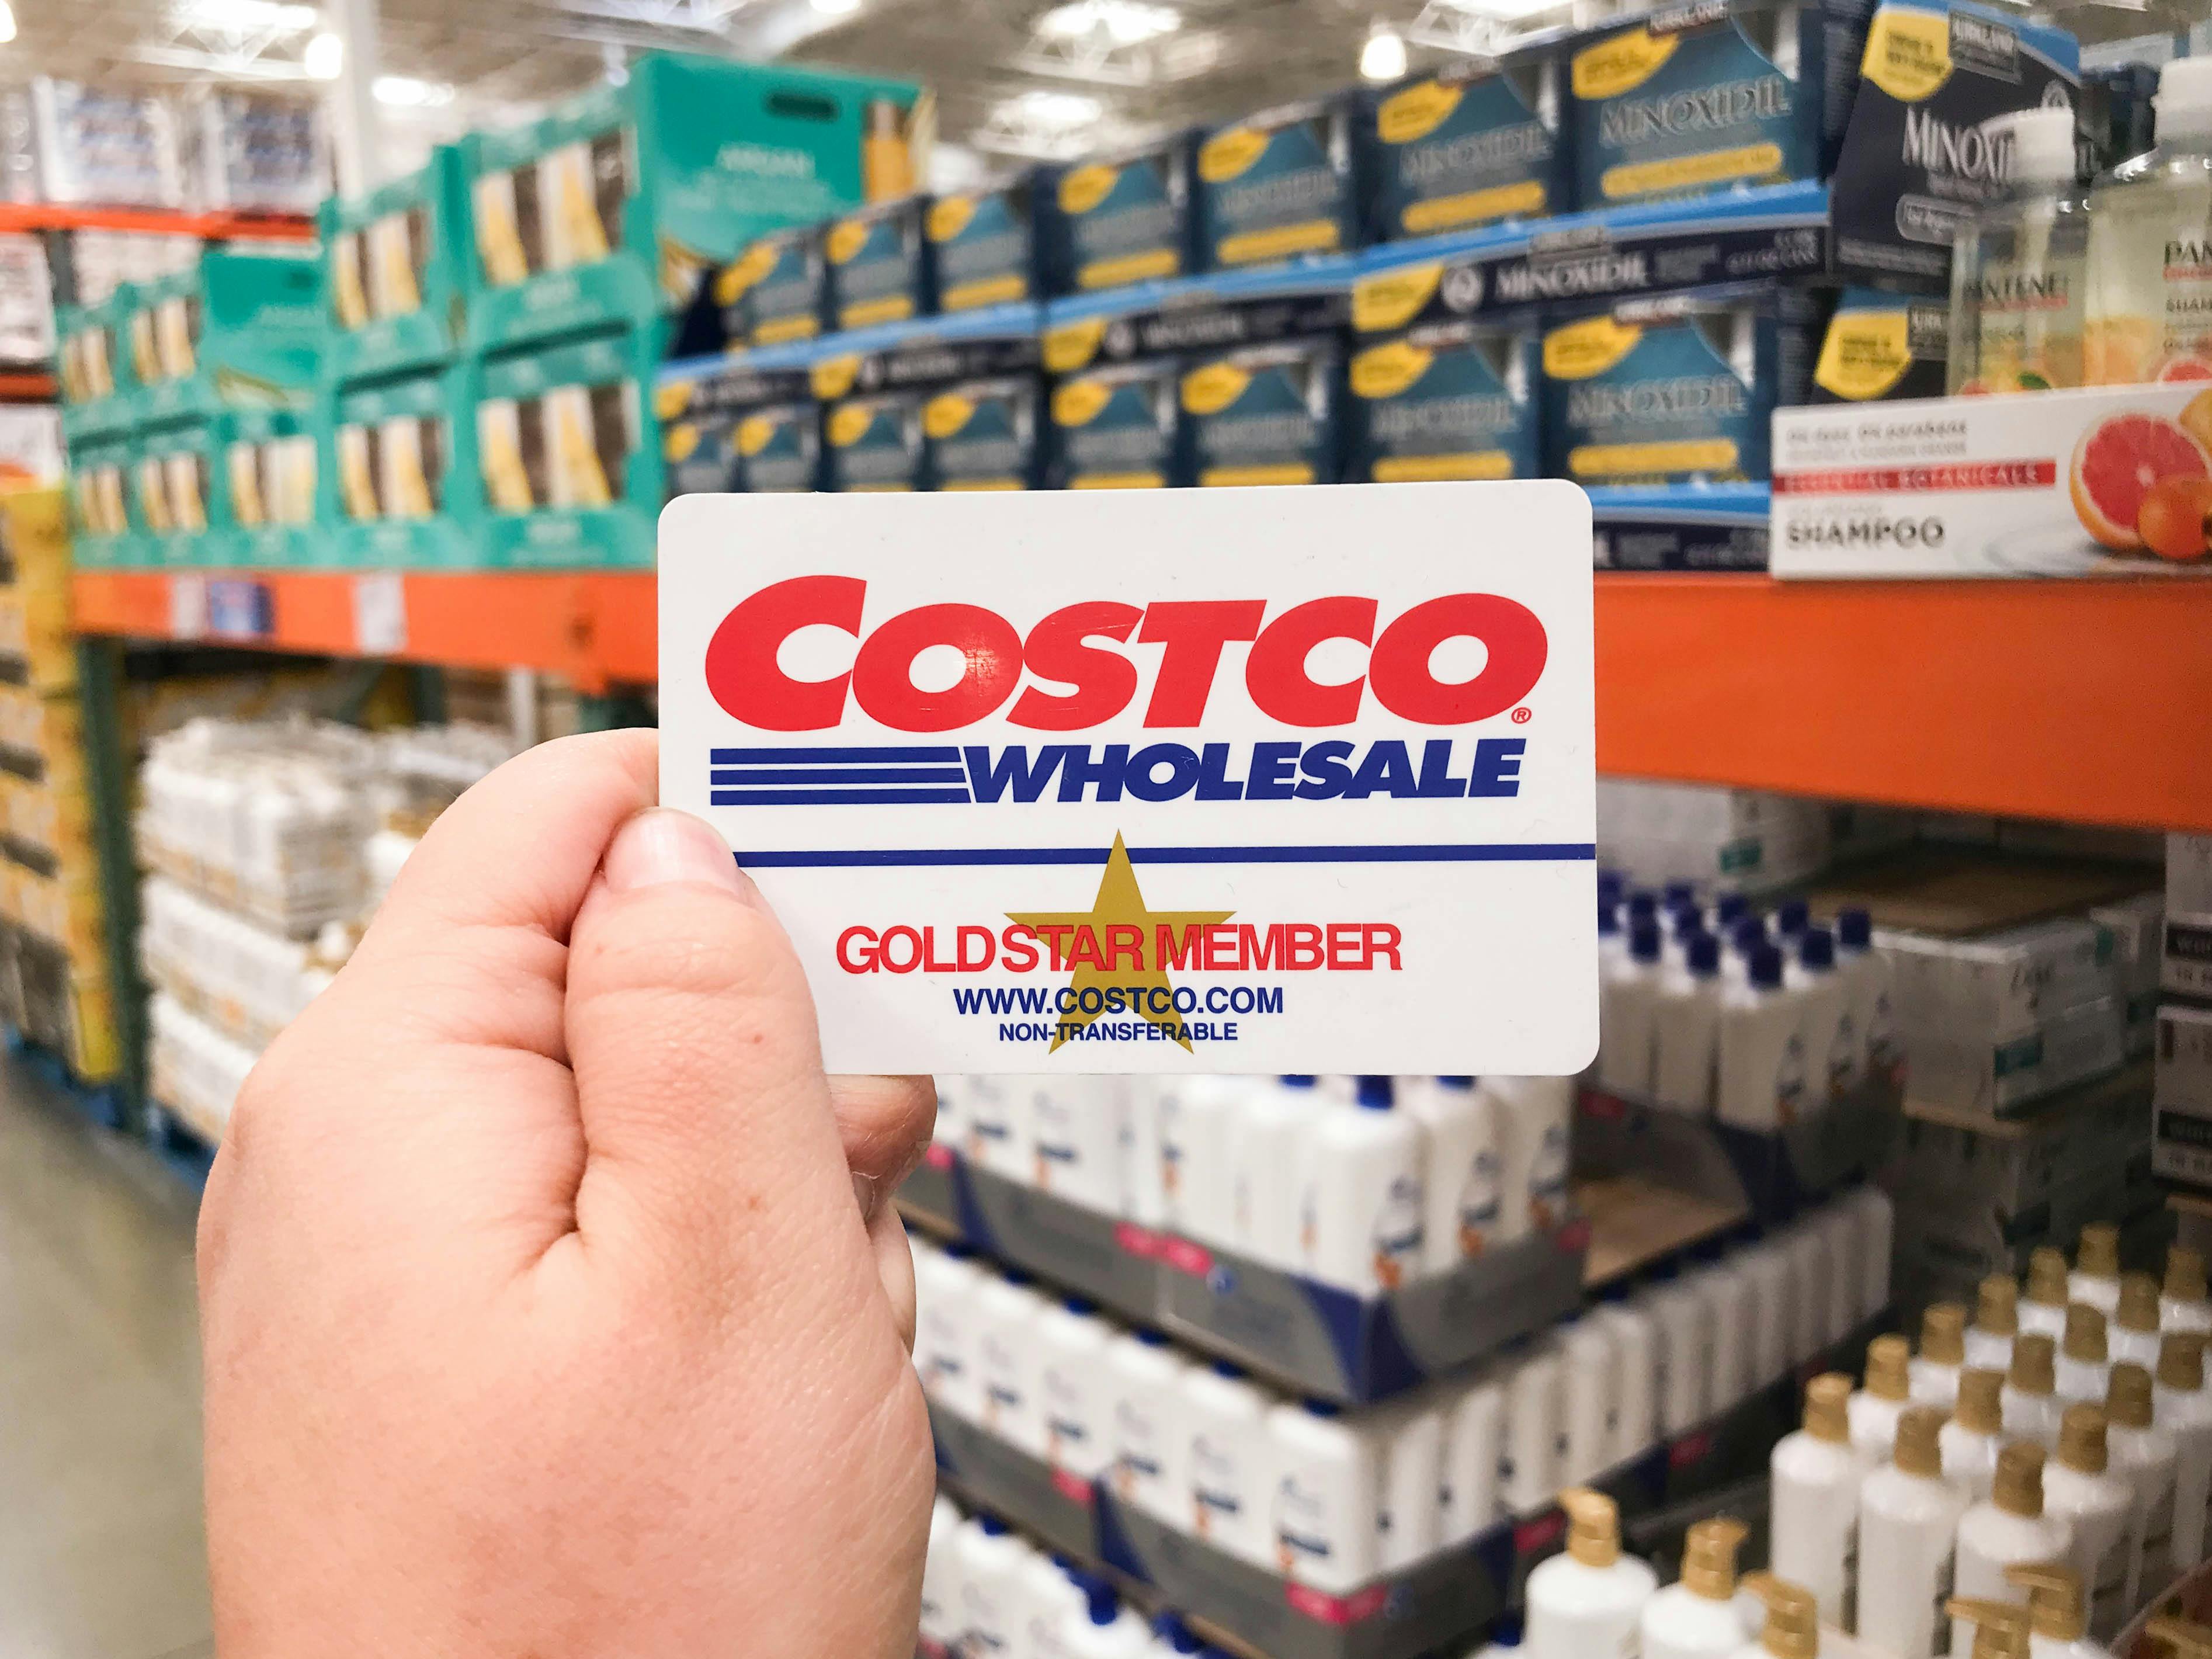 costco-membership-guide-the-krazy-coupon-lady